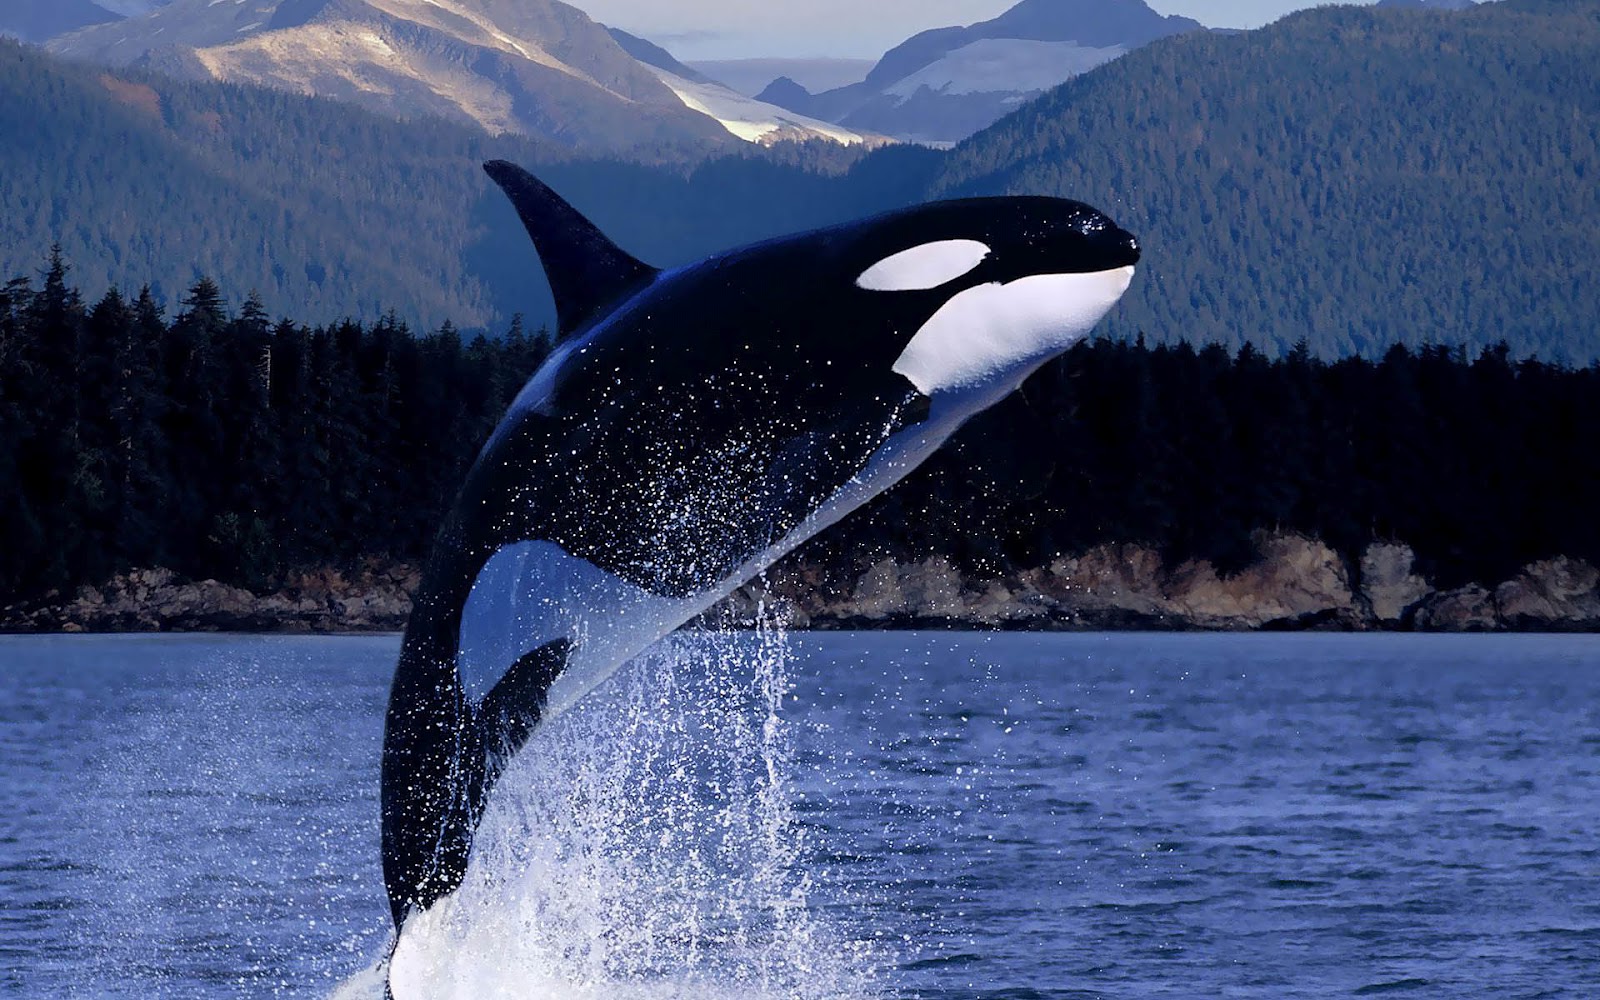 HD Animal Wallpaper With A Orca Killer Whale Jumping Out Of The Water